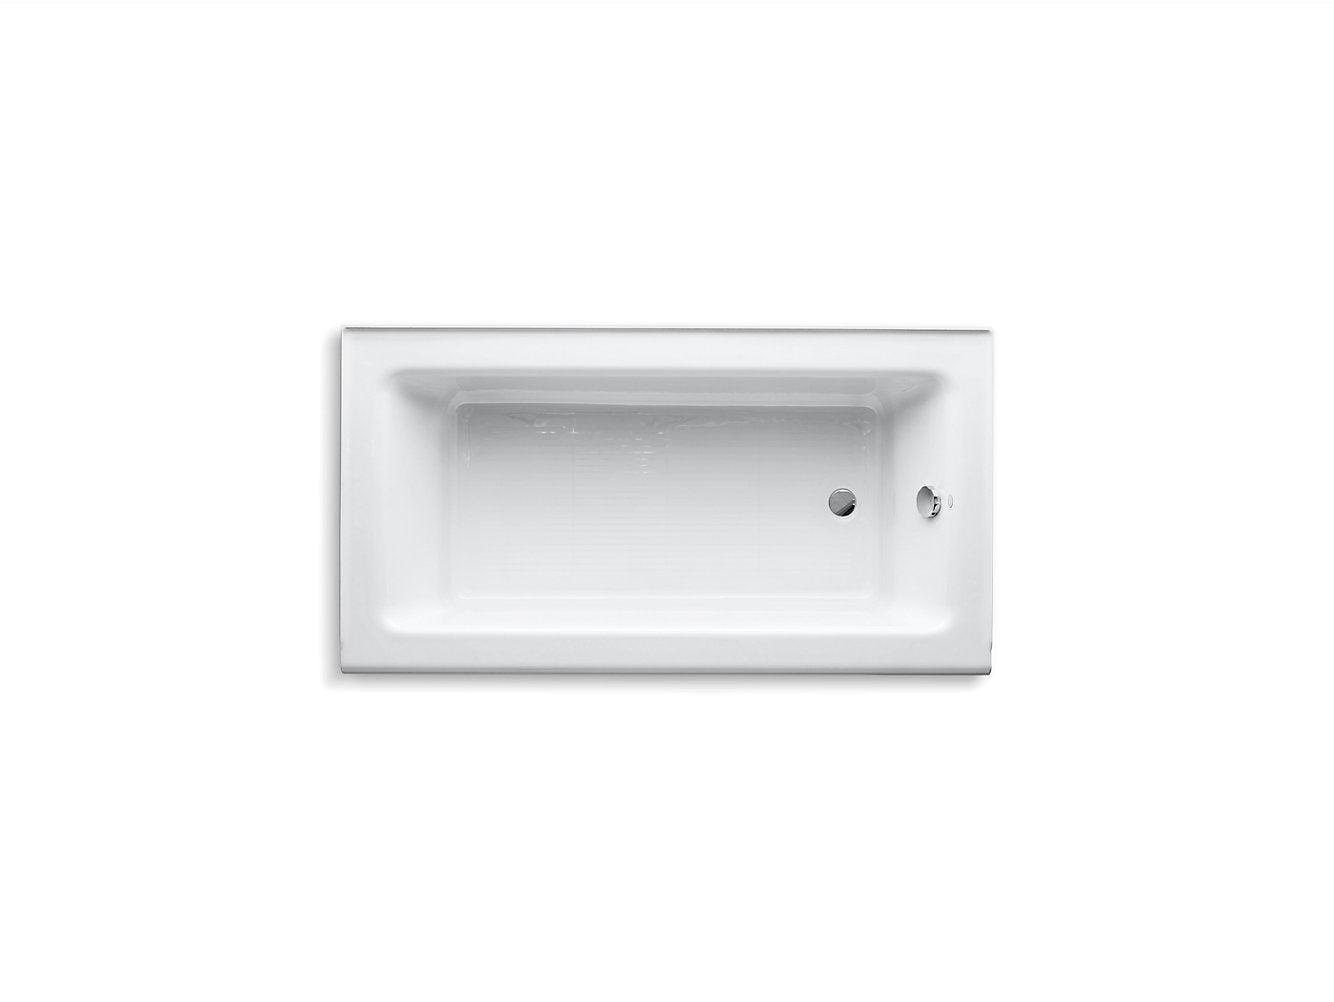 Kohler Bellwether 60" x 32" Alcove Bath With Integral Apron and Right Hand Drain